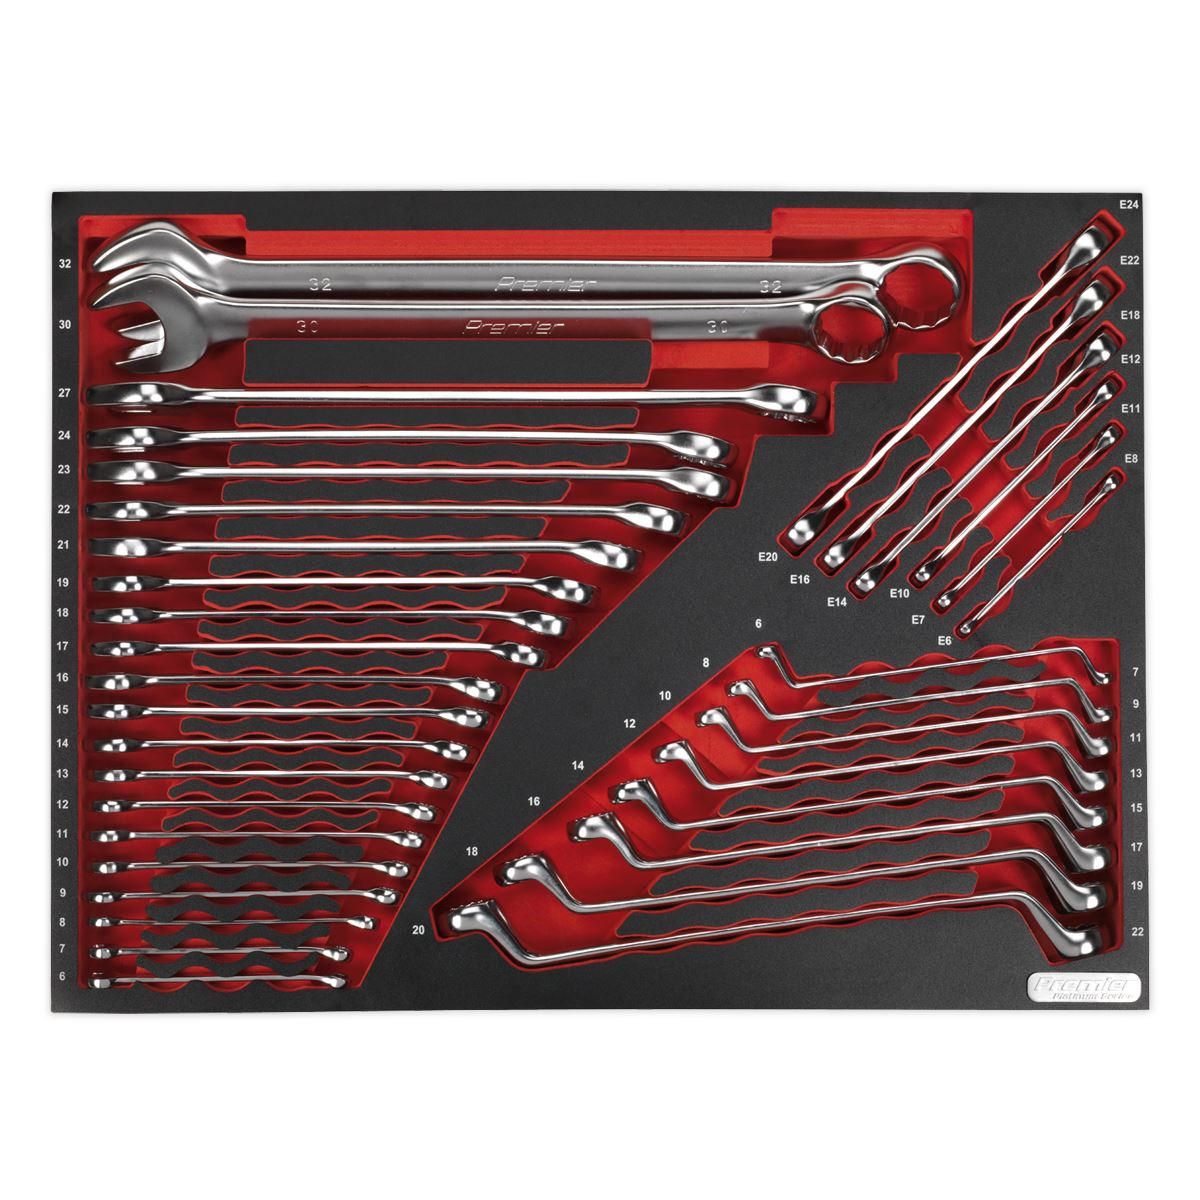 Sealey Premier Platinum Tool Tray with Spanner Set 35pc